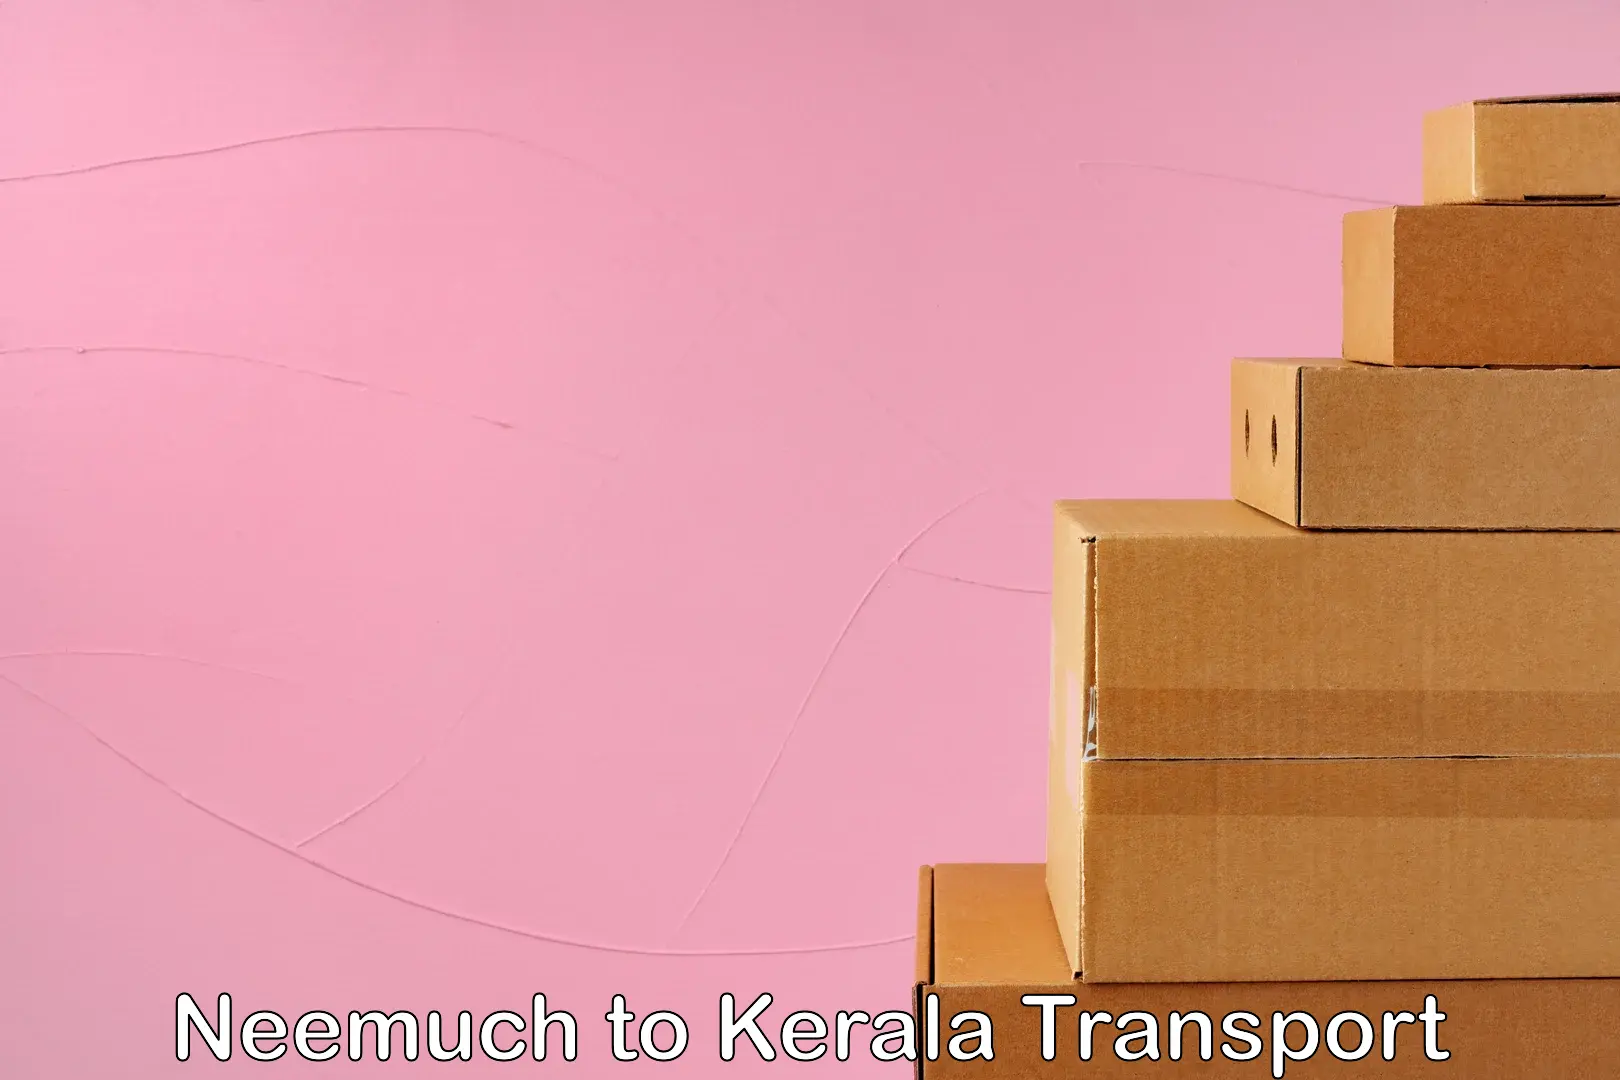 Daily parcel service transport Neemuch to Kerala